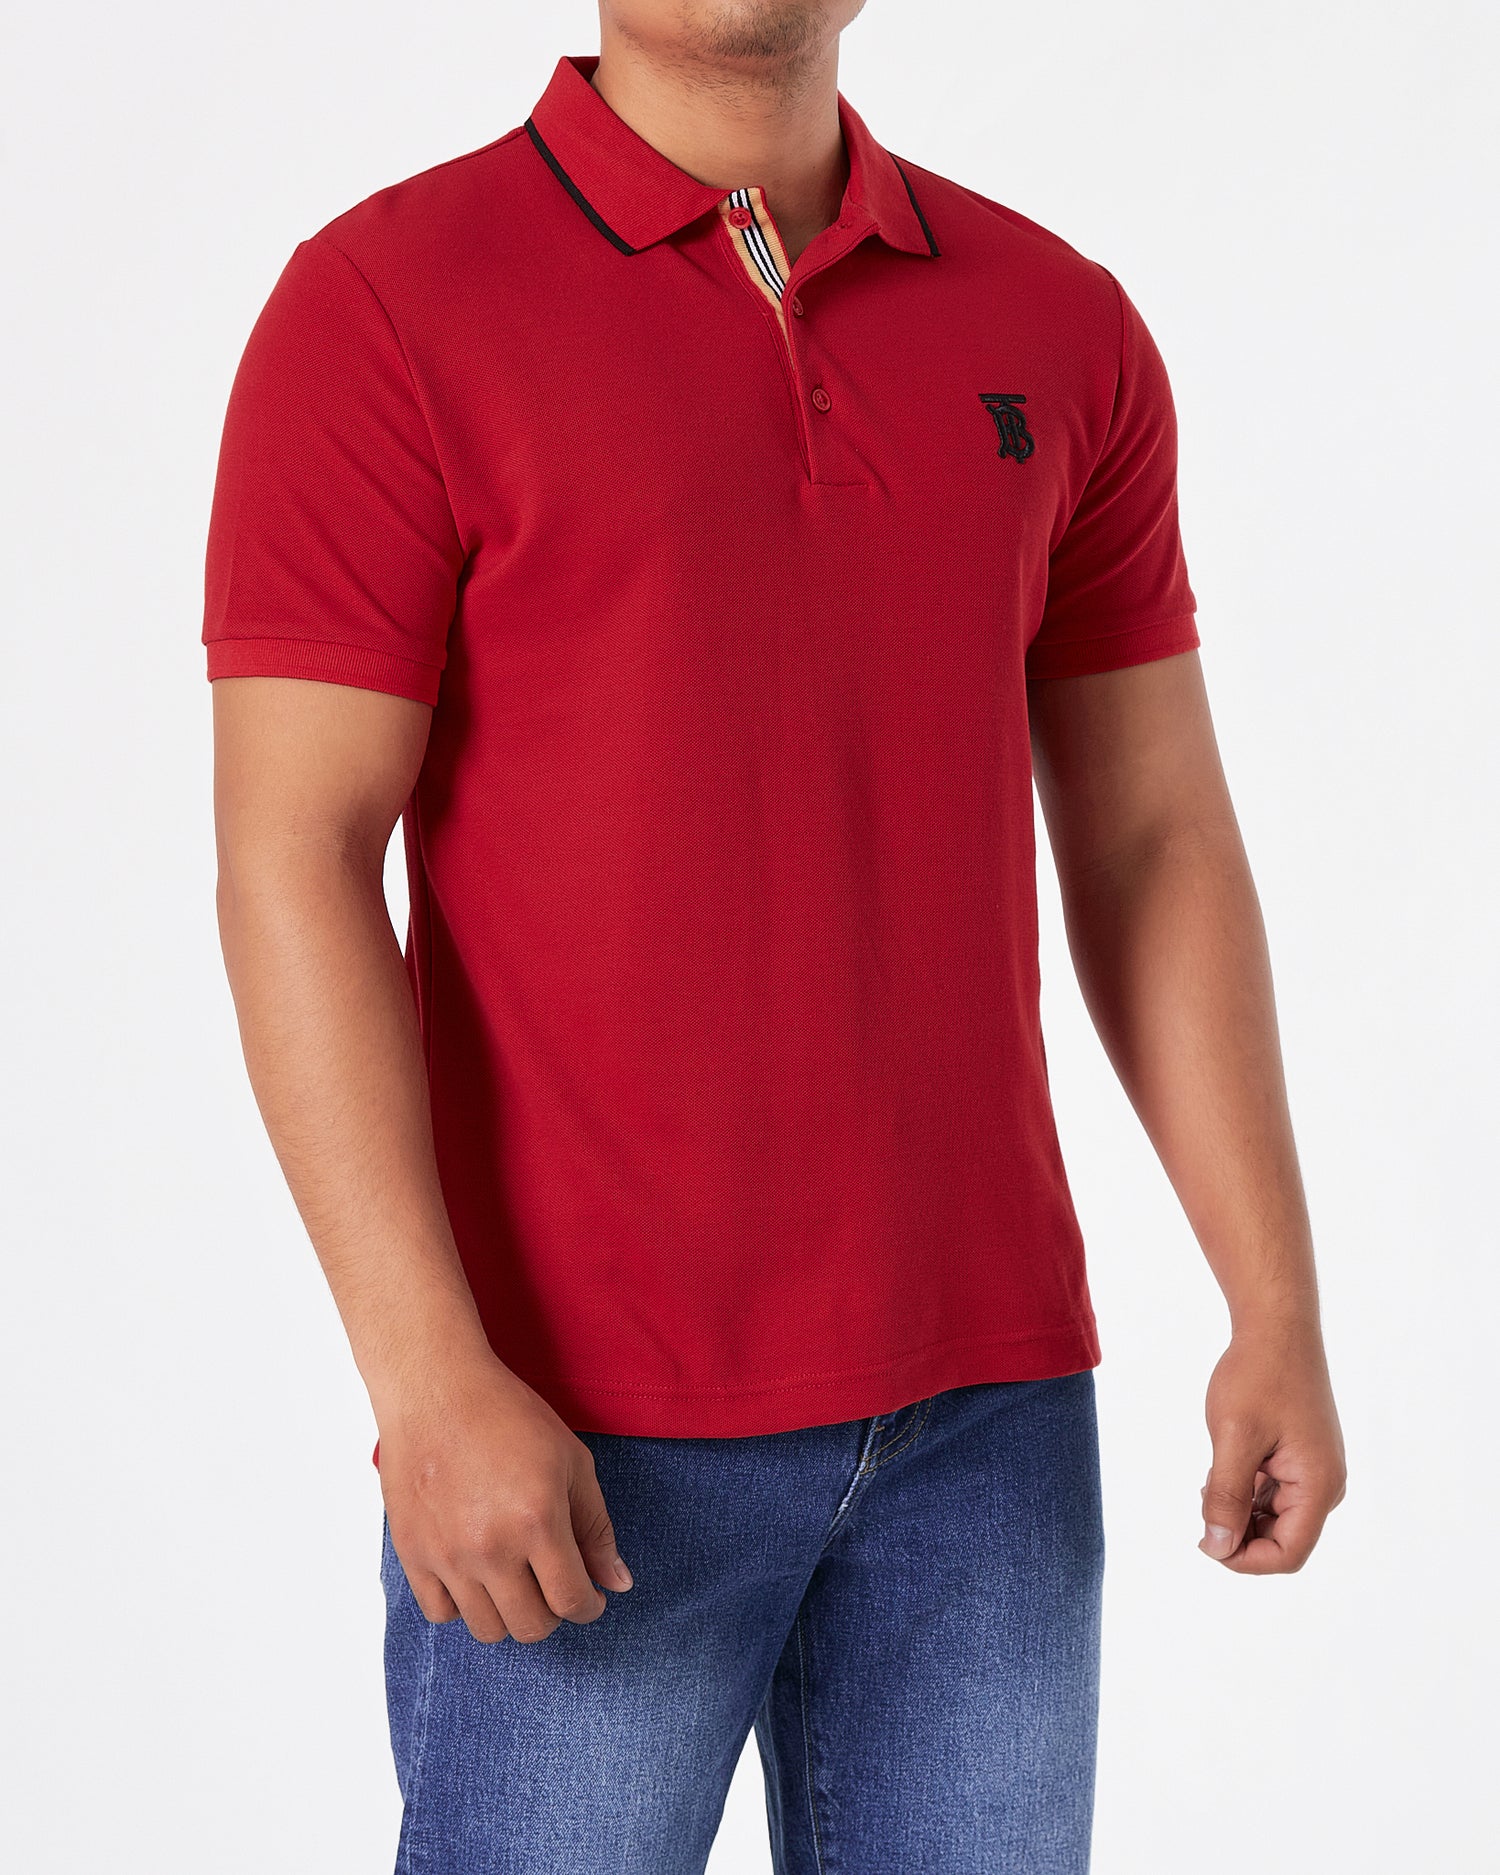 BUR TB Embroidered Men Red Polo Shirt 23.90